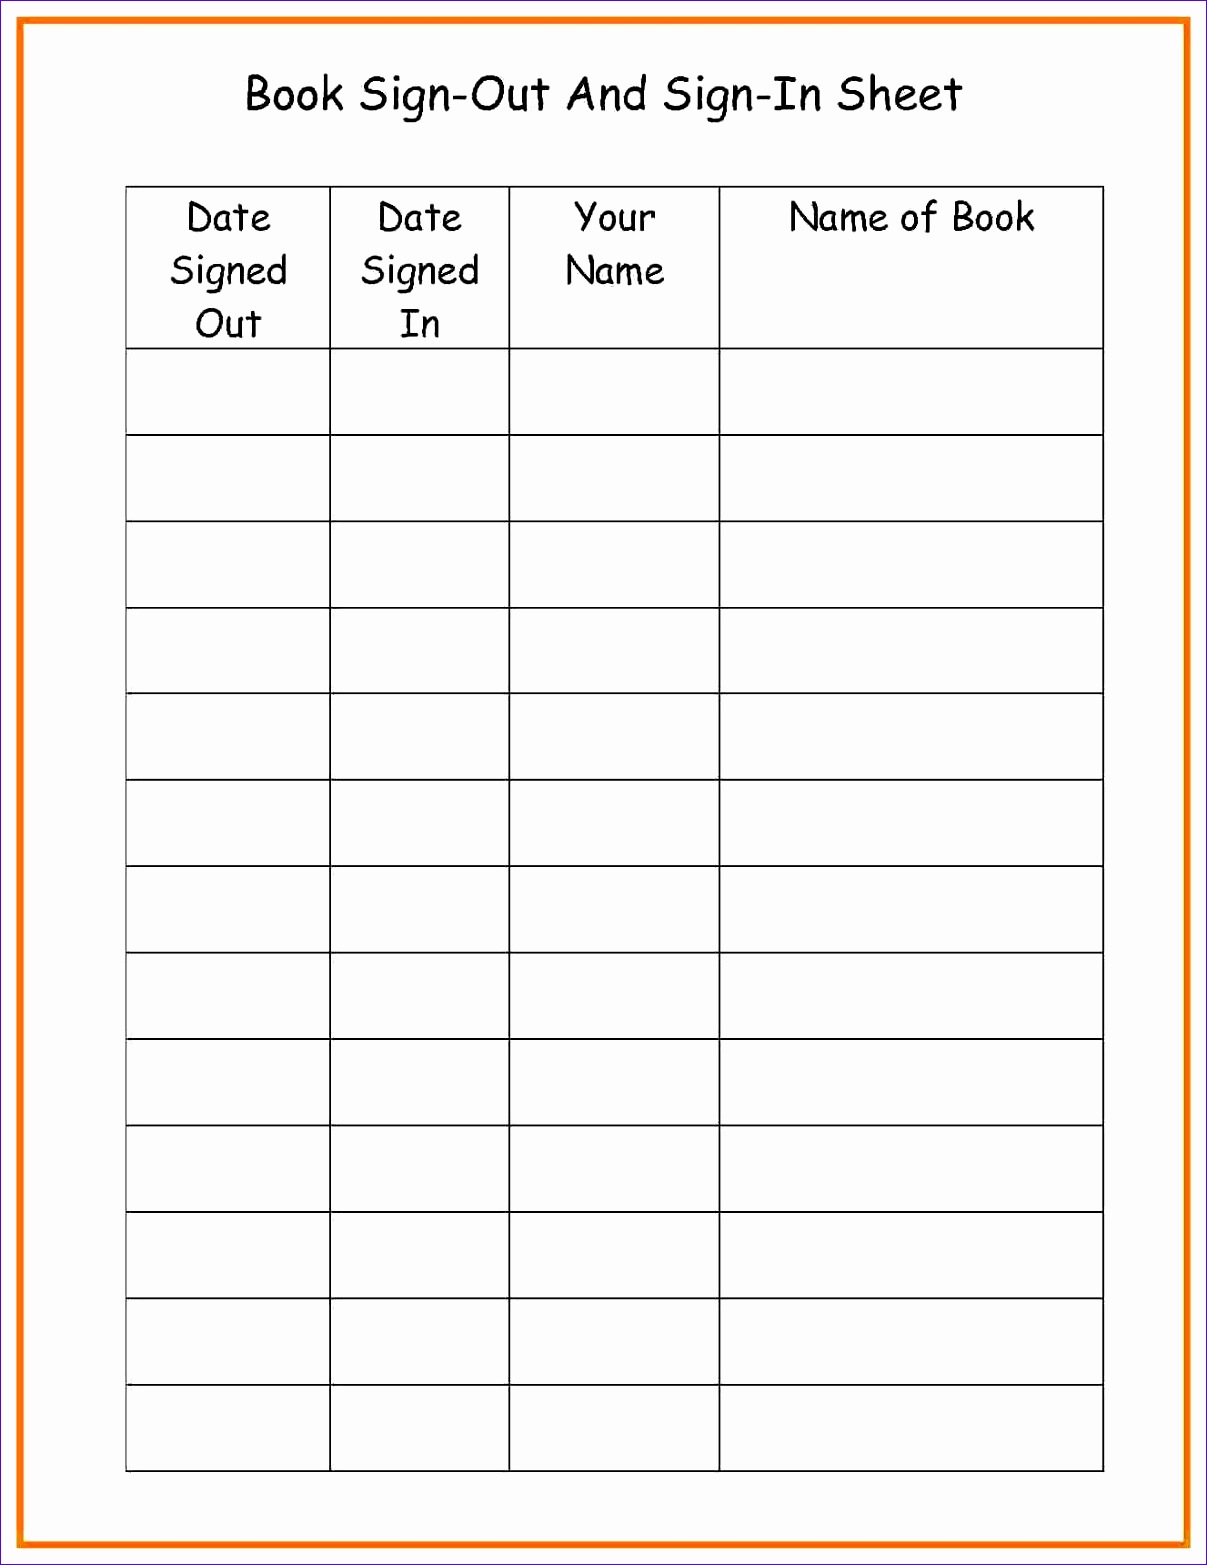 12 Sign Out Sheet Template Attendance Download Pin Equipment 12 sign out sheet template attendance pin equipment on pinterest word spreadsheet excel book 12 sign out sheet template attendance pin equipment on pinterest